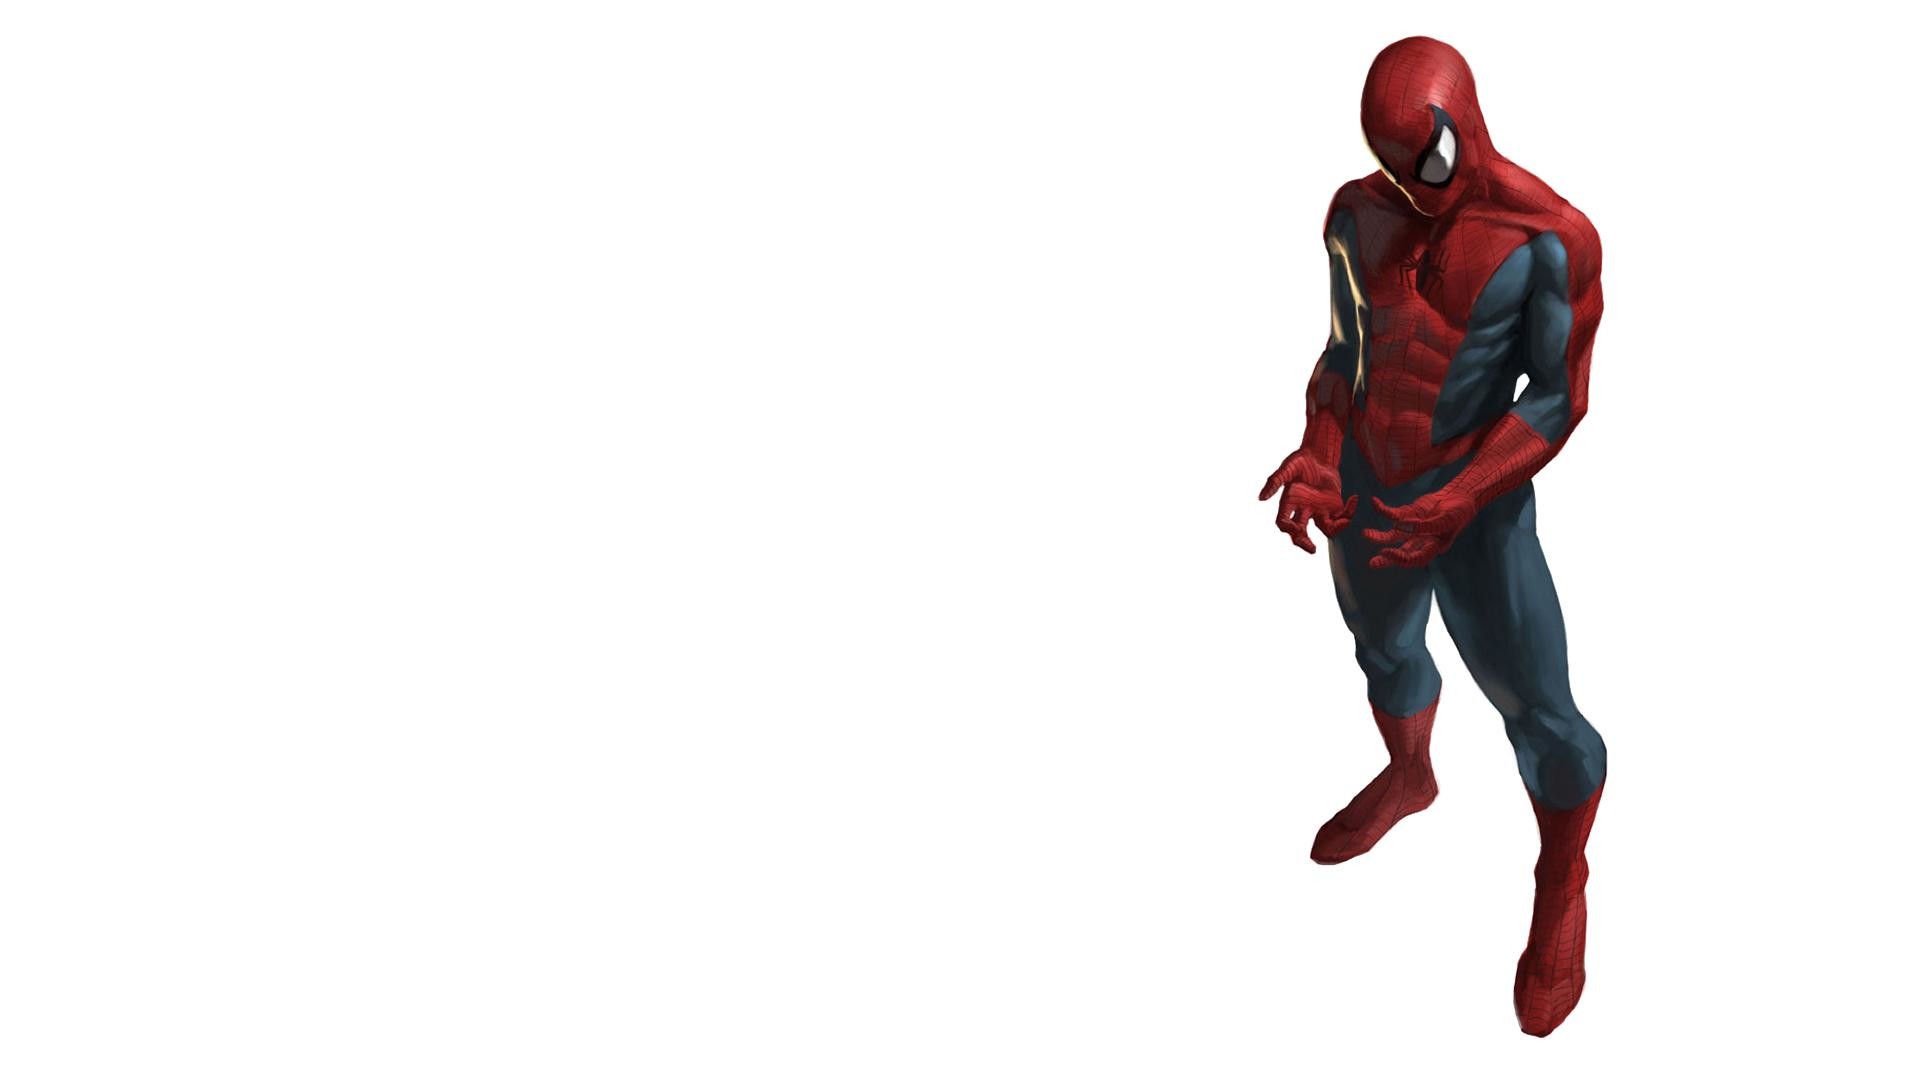 1920x1080 Spiderman Comics Spider-man Superhero over white background Wallpapers HD /  Desktop and Mobile Backgrounds